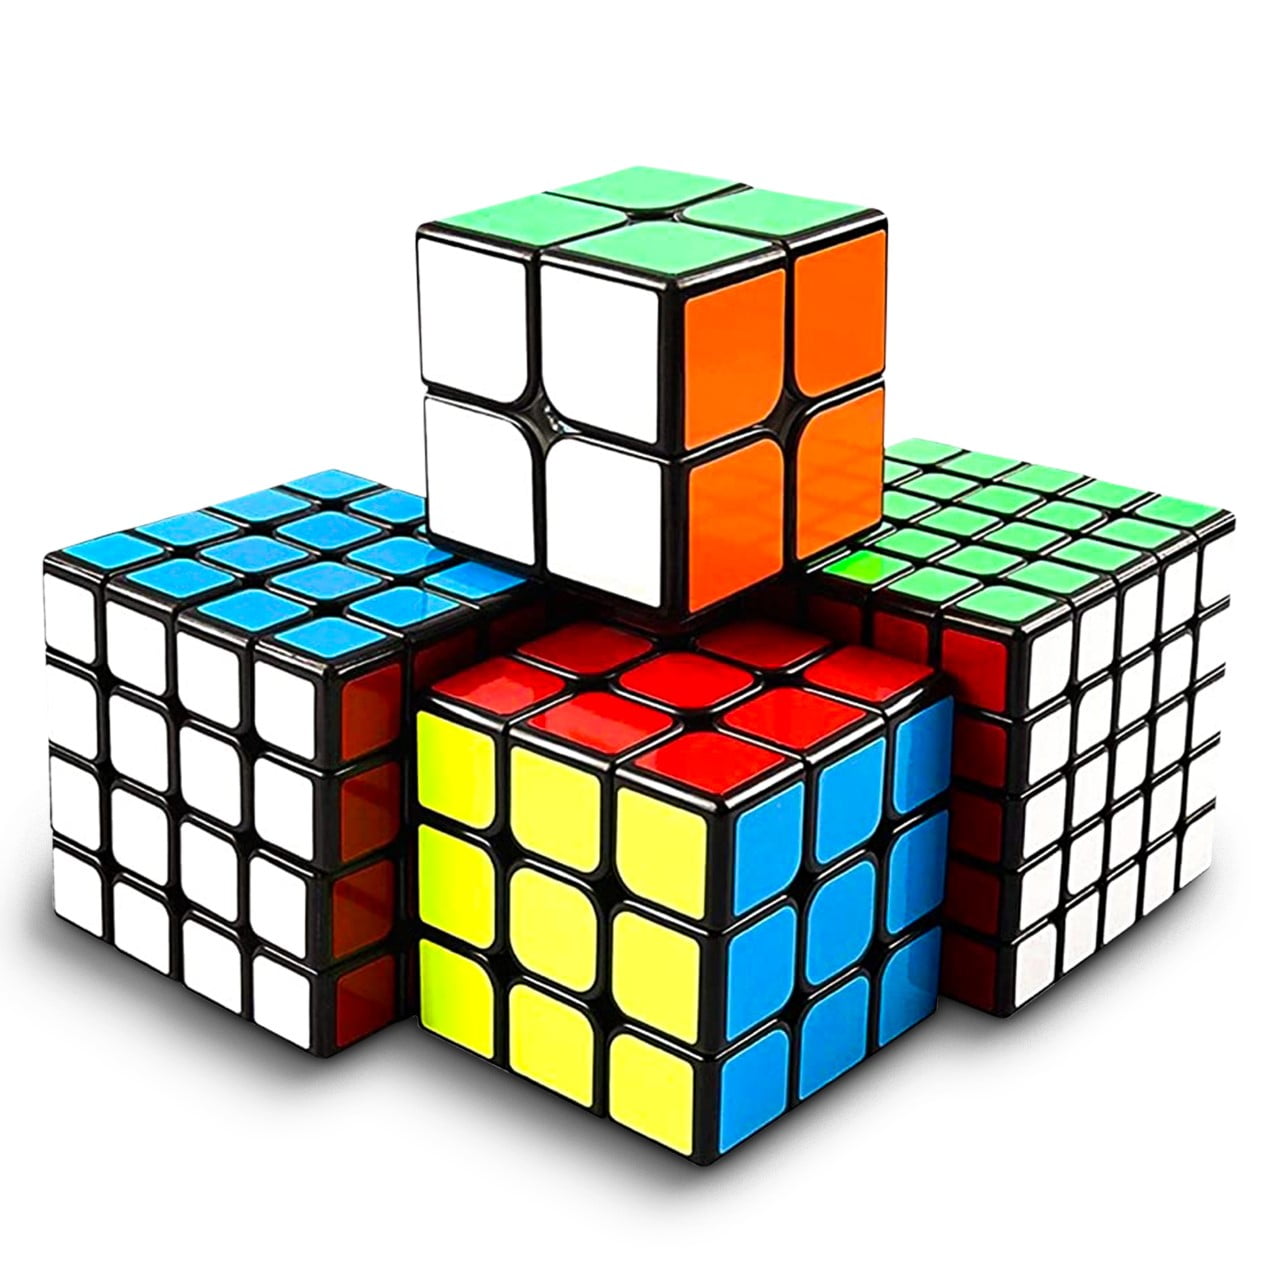 Speed Cube Toy Fun 4x4 Magic Puzzle Game Smooth Brain Twist for "Rubik" Style 